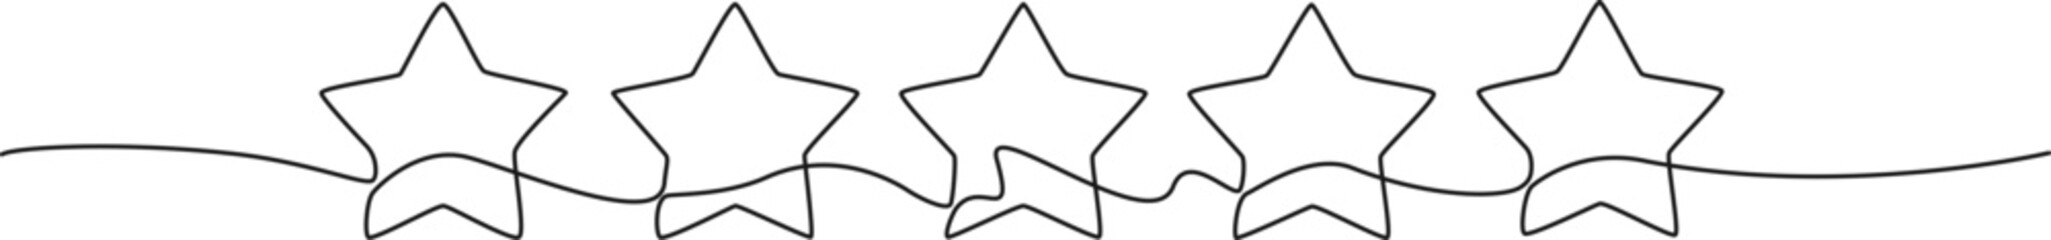 continuous single line drawing of five stars in a row, line art vector illustration